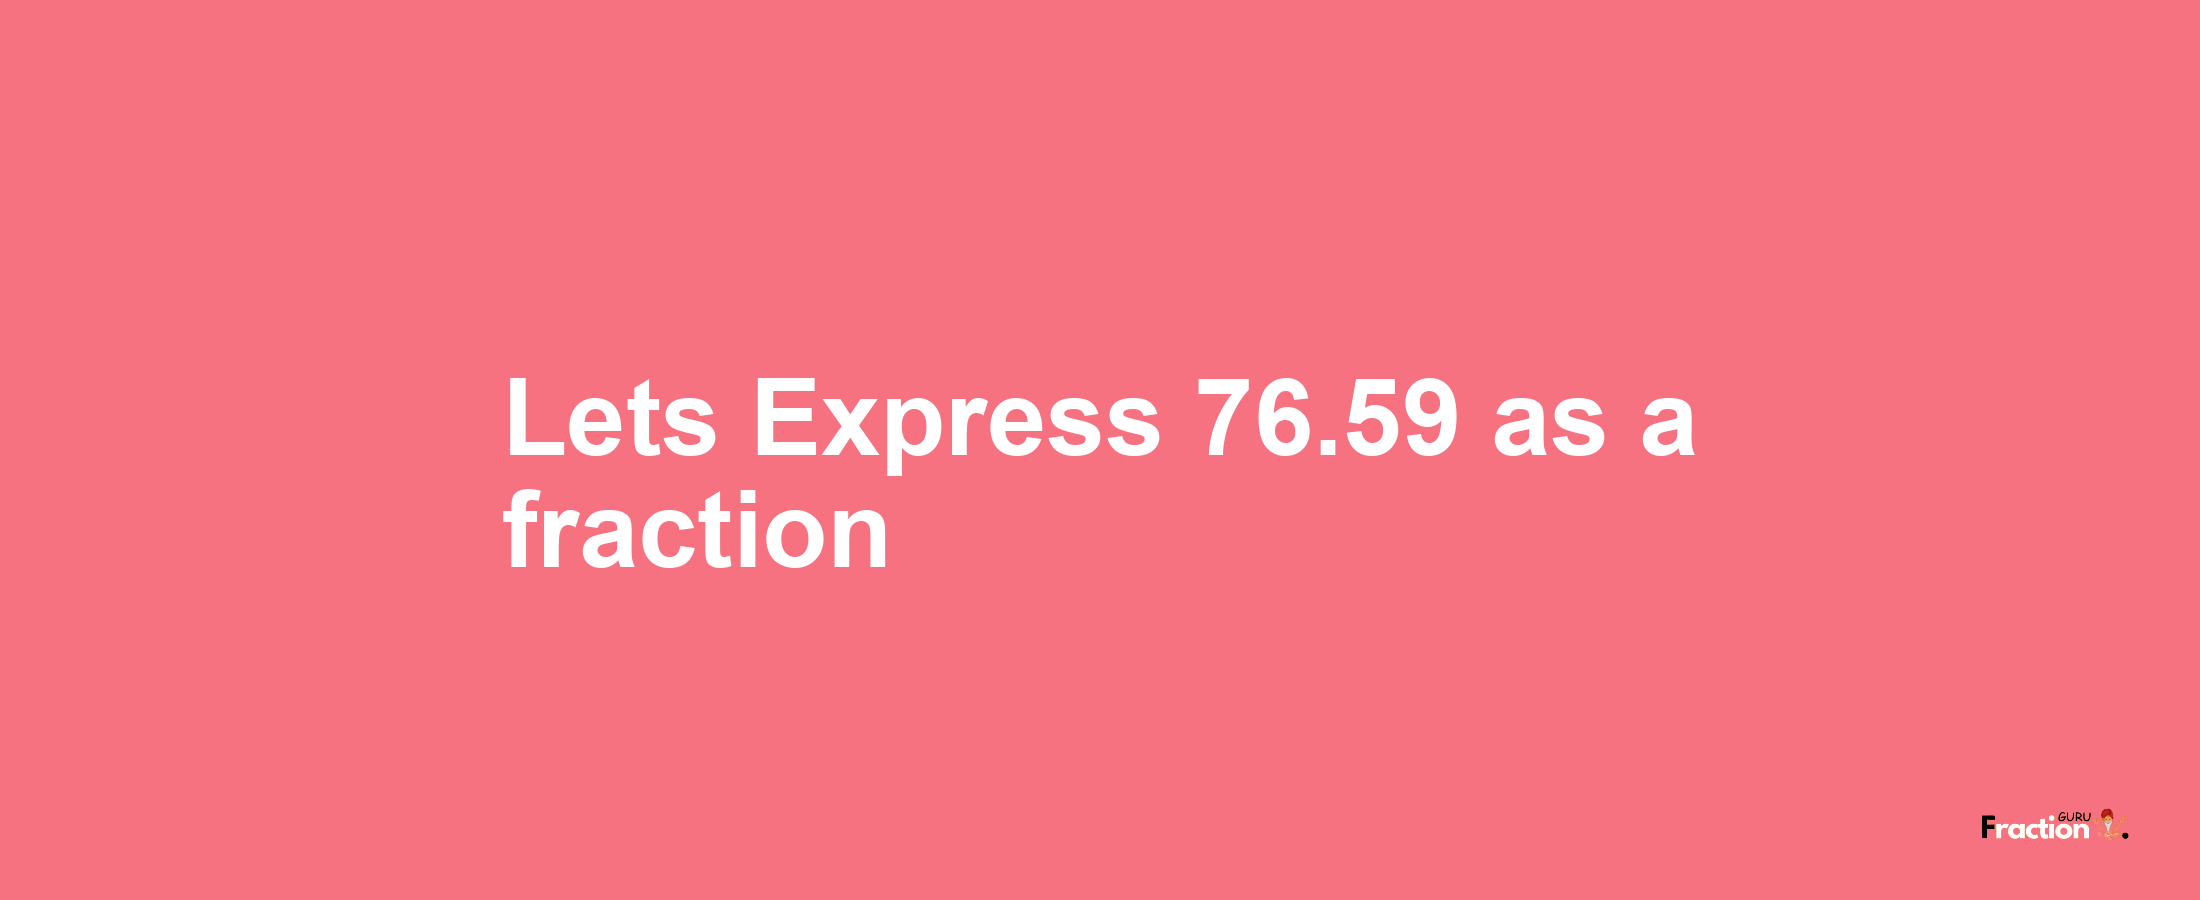 Lets Express 76.59 as afraction